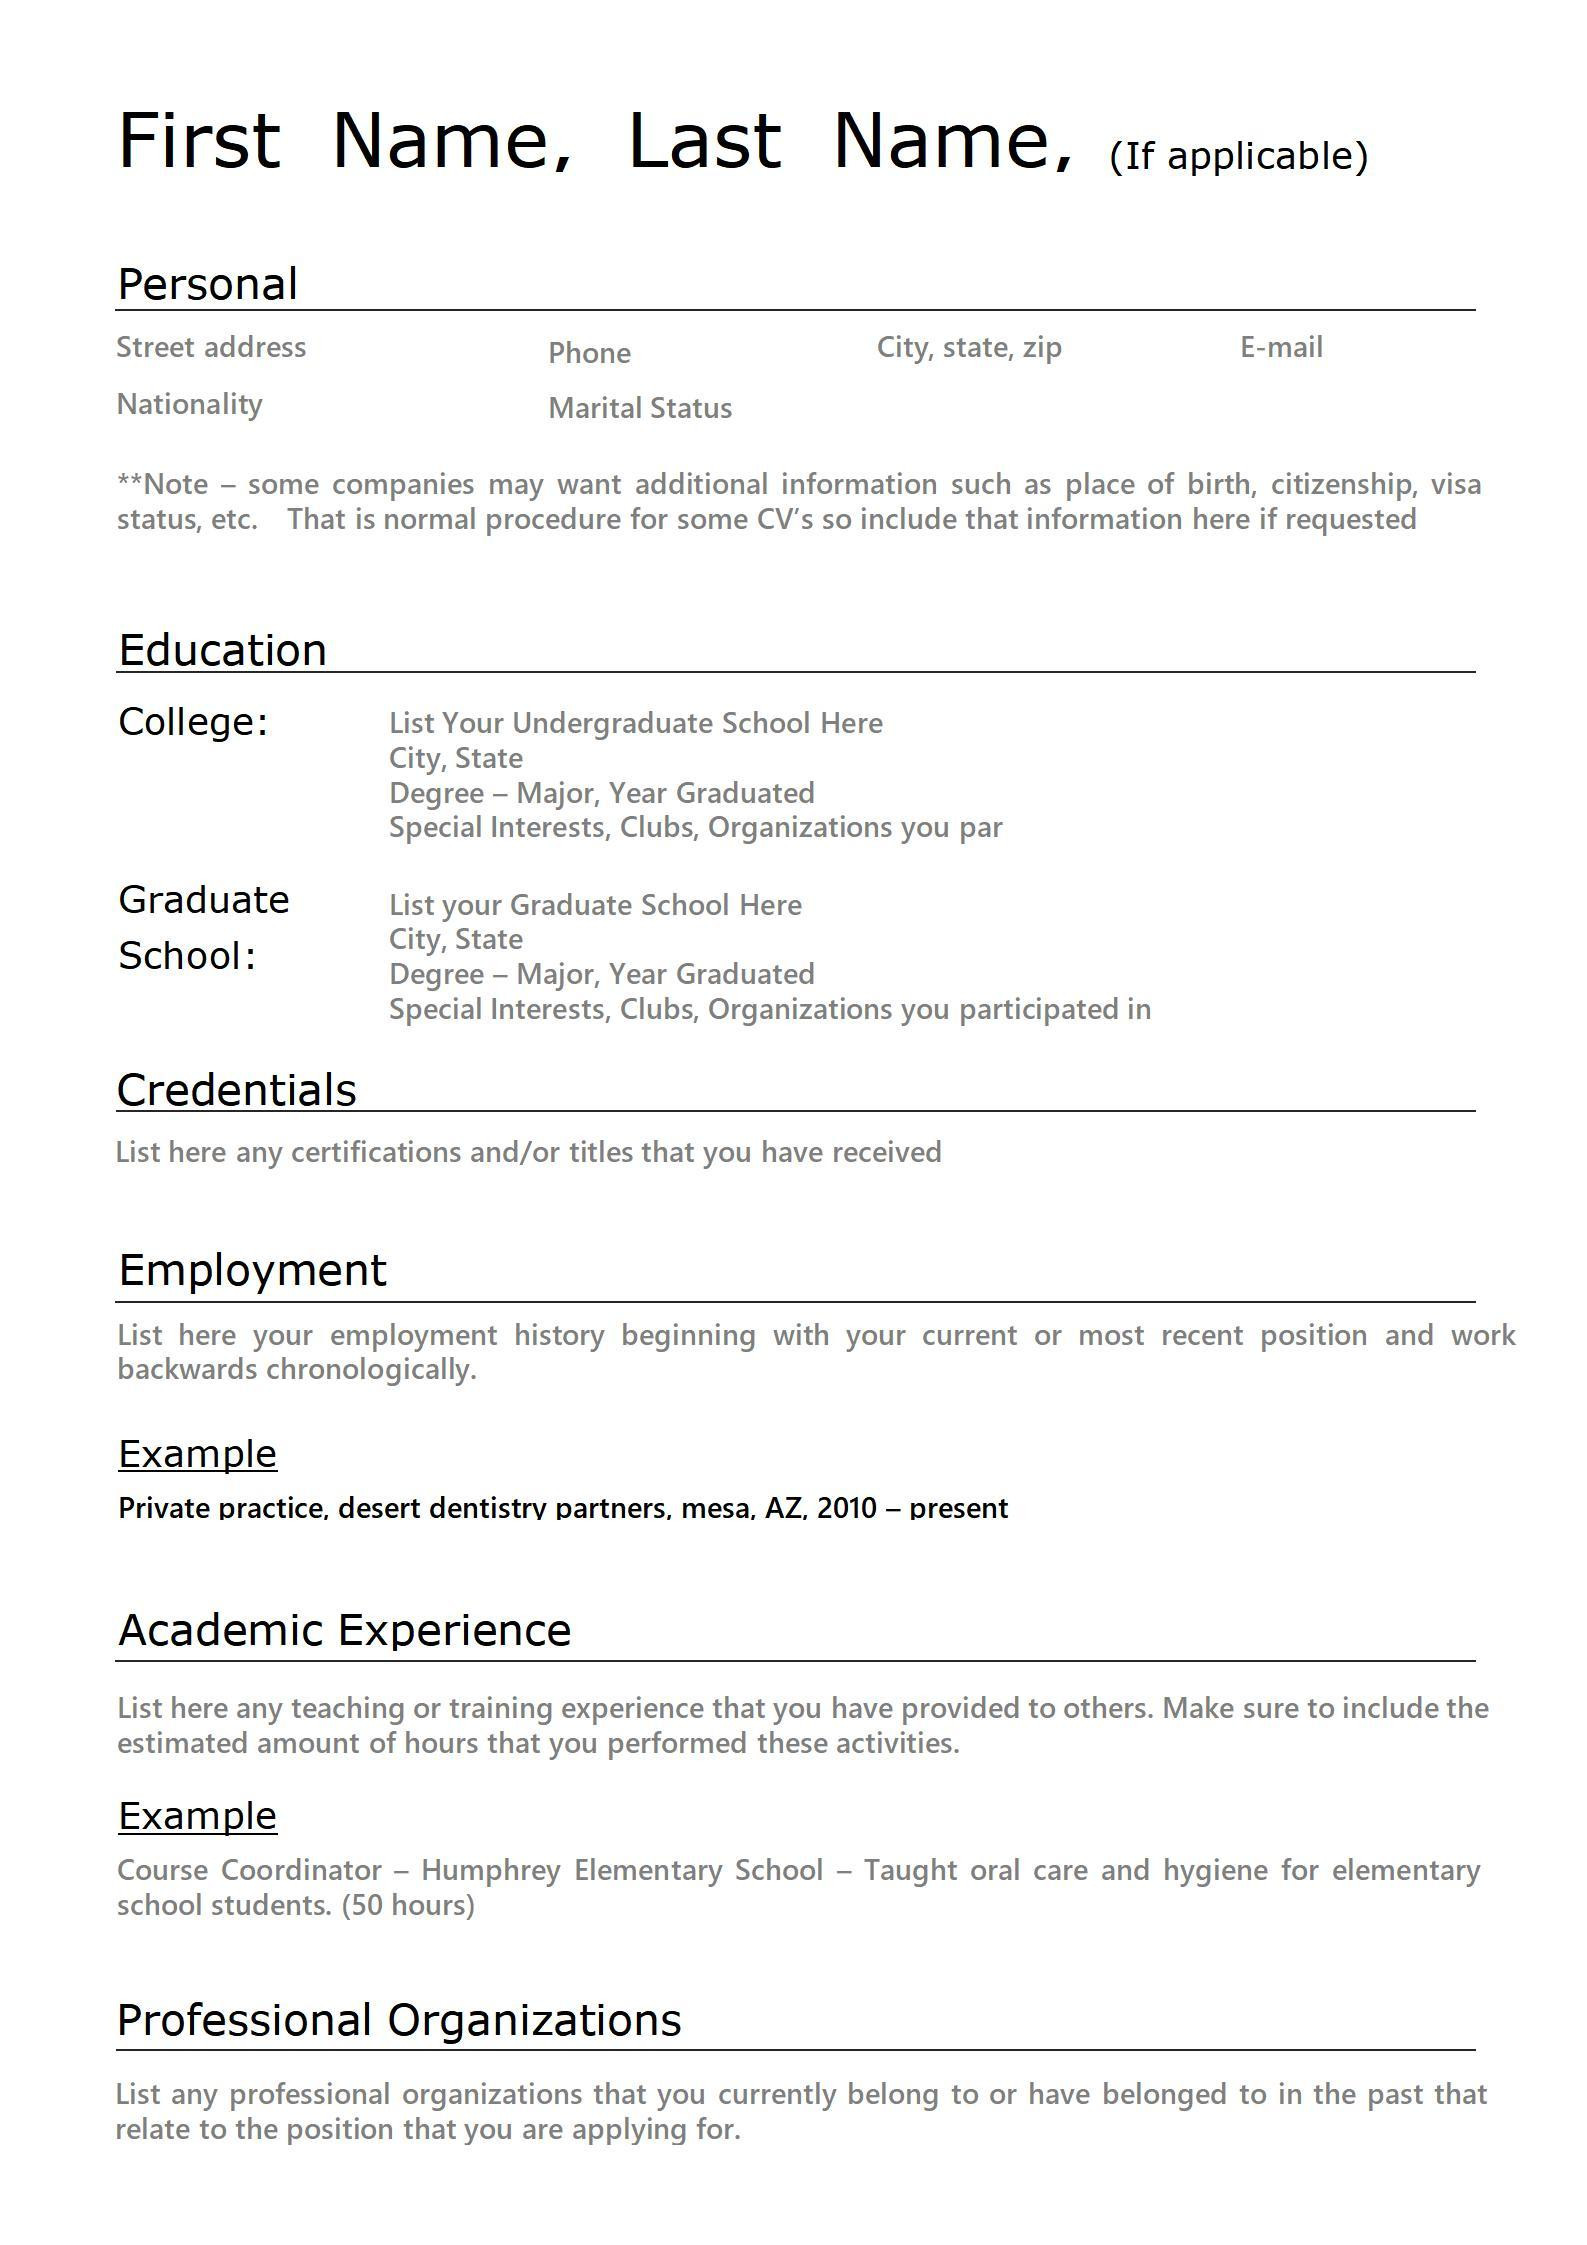 Sample Resume with No Work Experience College Graduate First-time Resume with No Experience Samples Wps Office Academy